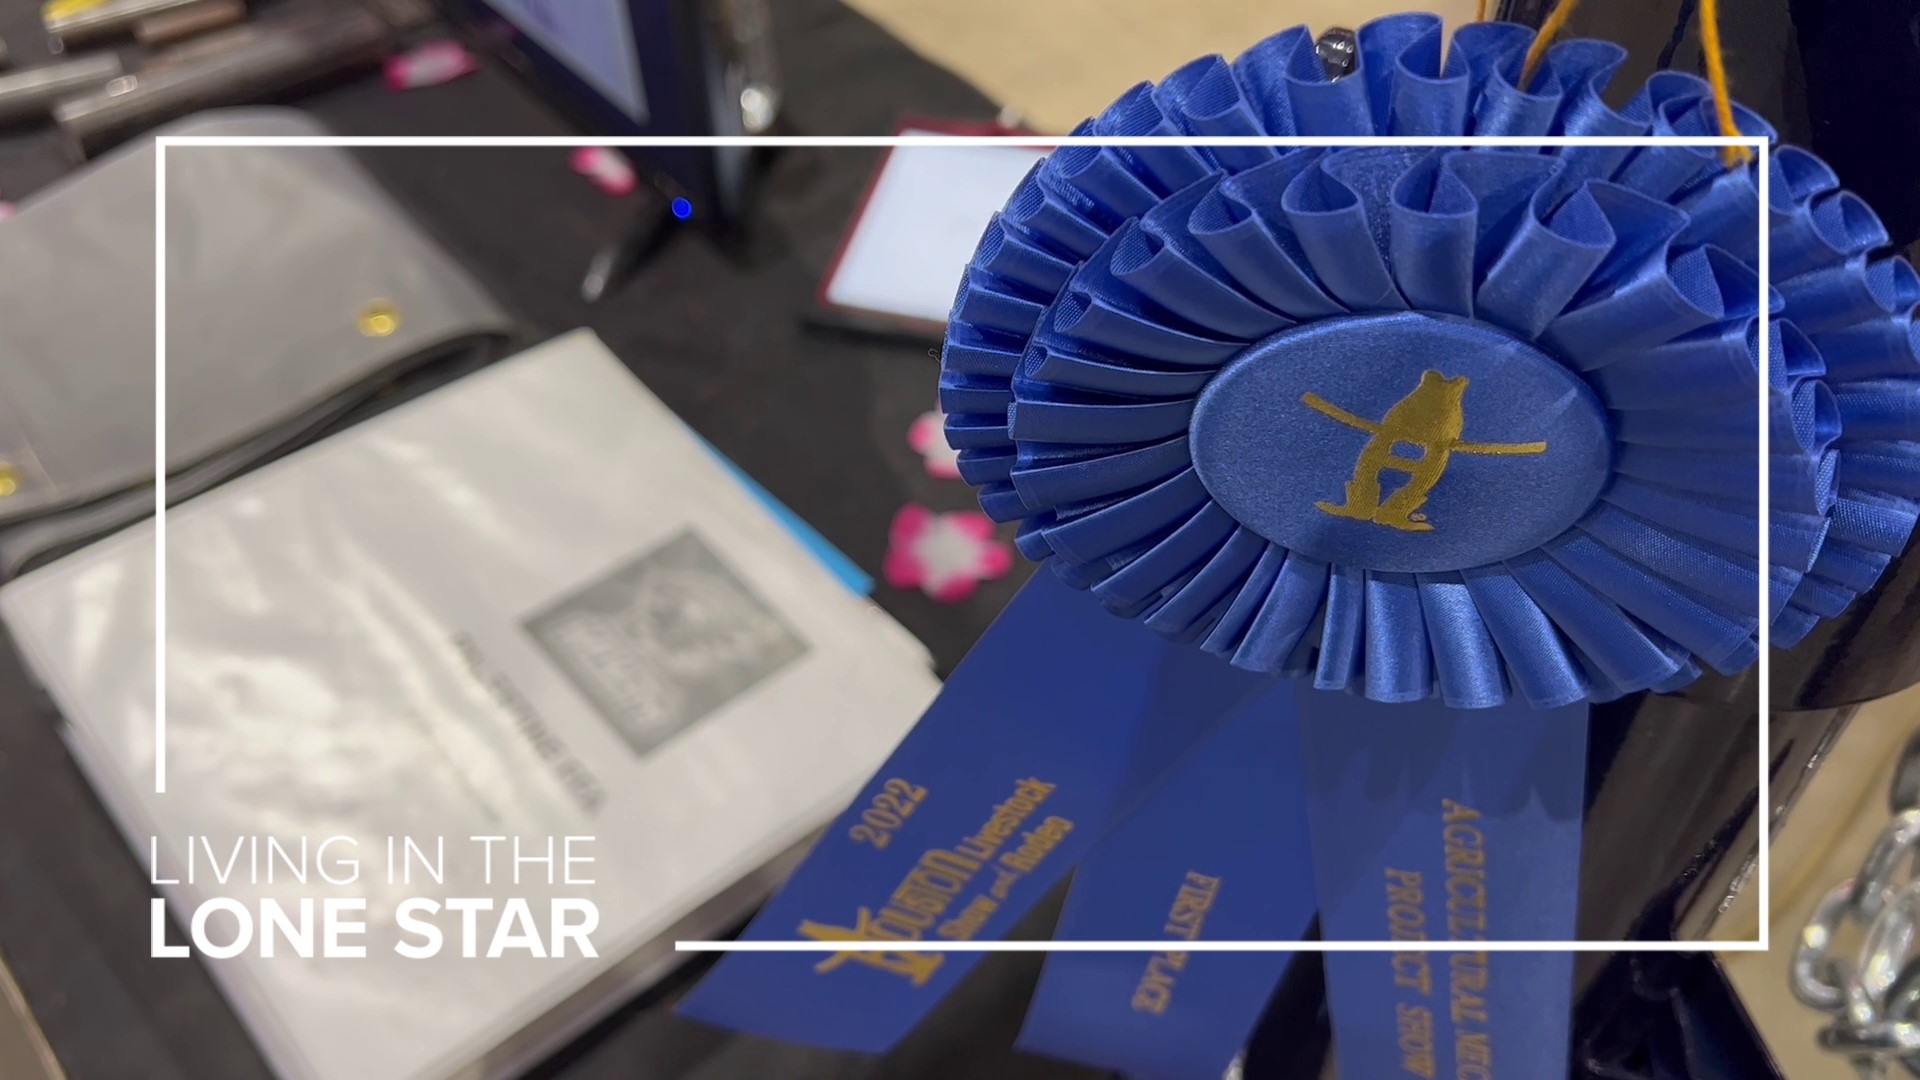 From next-level chicken coops and lighted horse trailers to self-dumping hay trailers and plasma tables, the contest features projects students made from scratch.